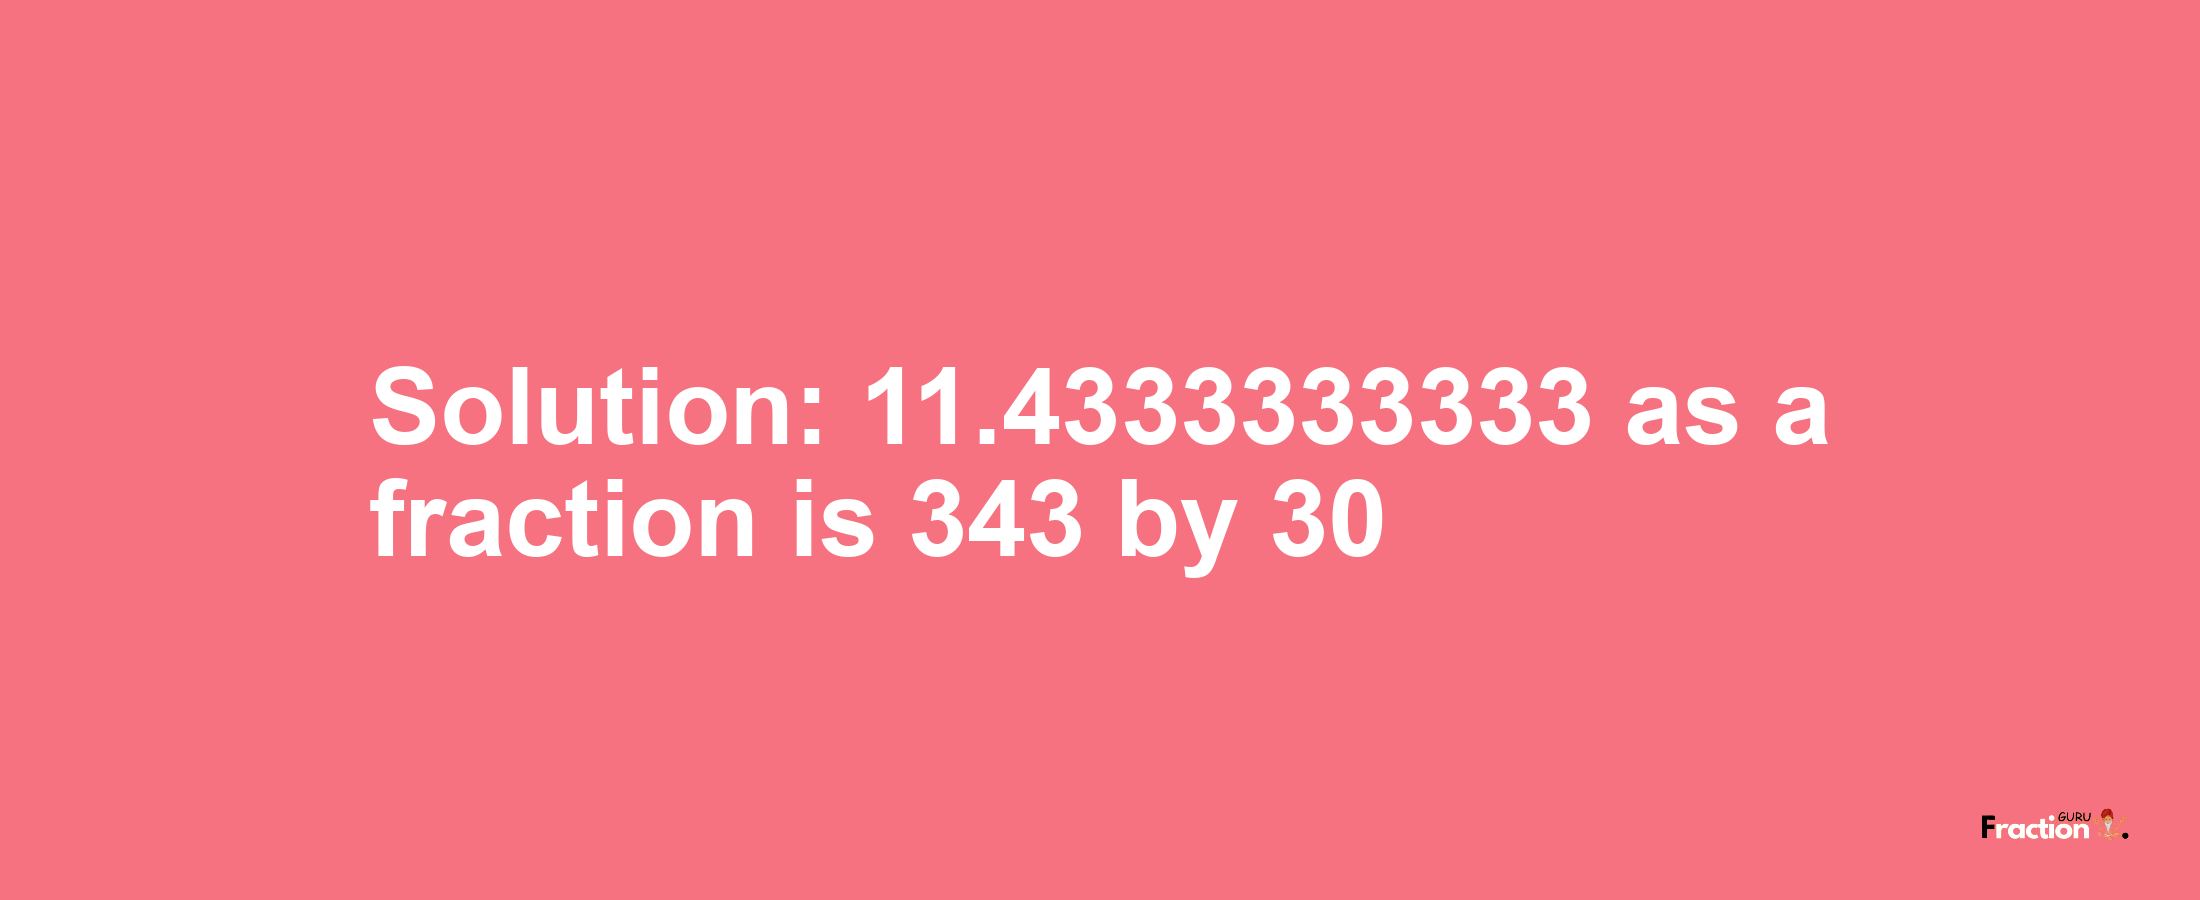 Solution:11.4333333333 as a fraction is 343/30